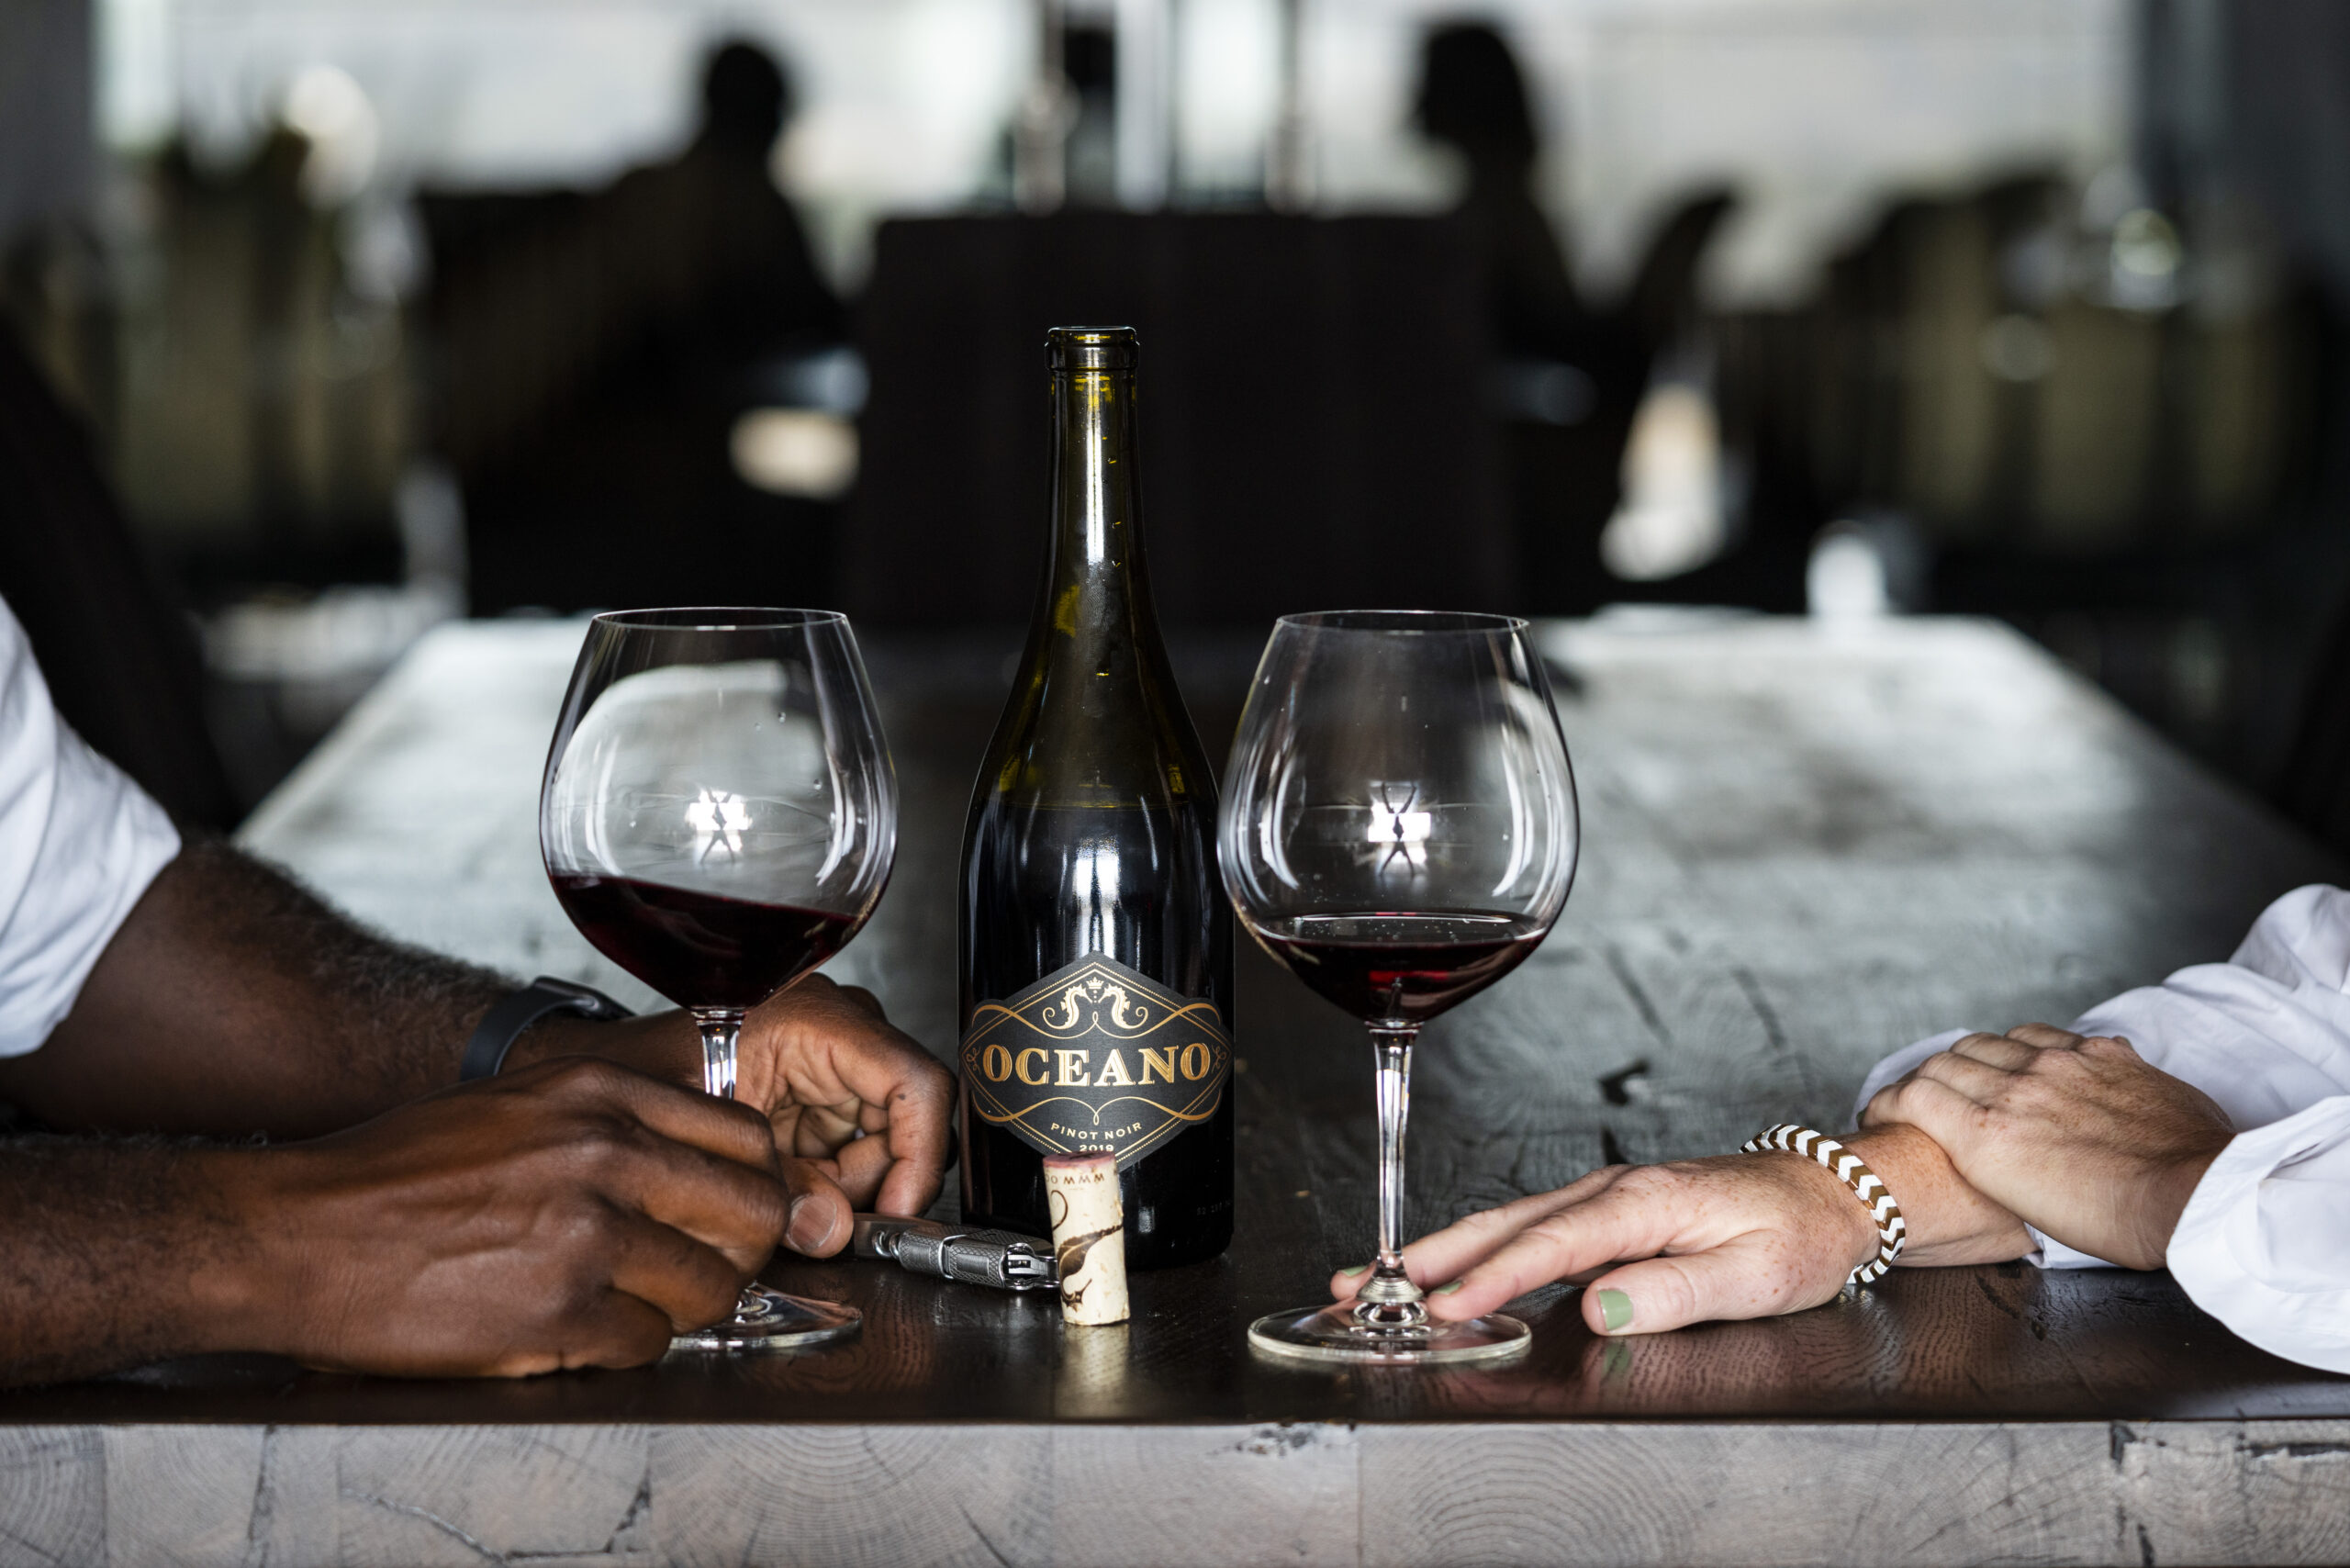 two people drinking Oceano Pinot Noir together at table